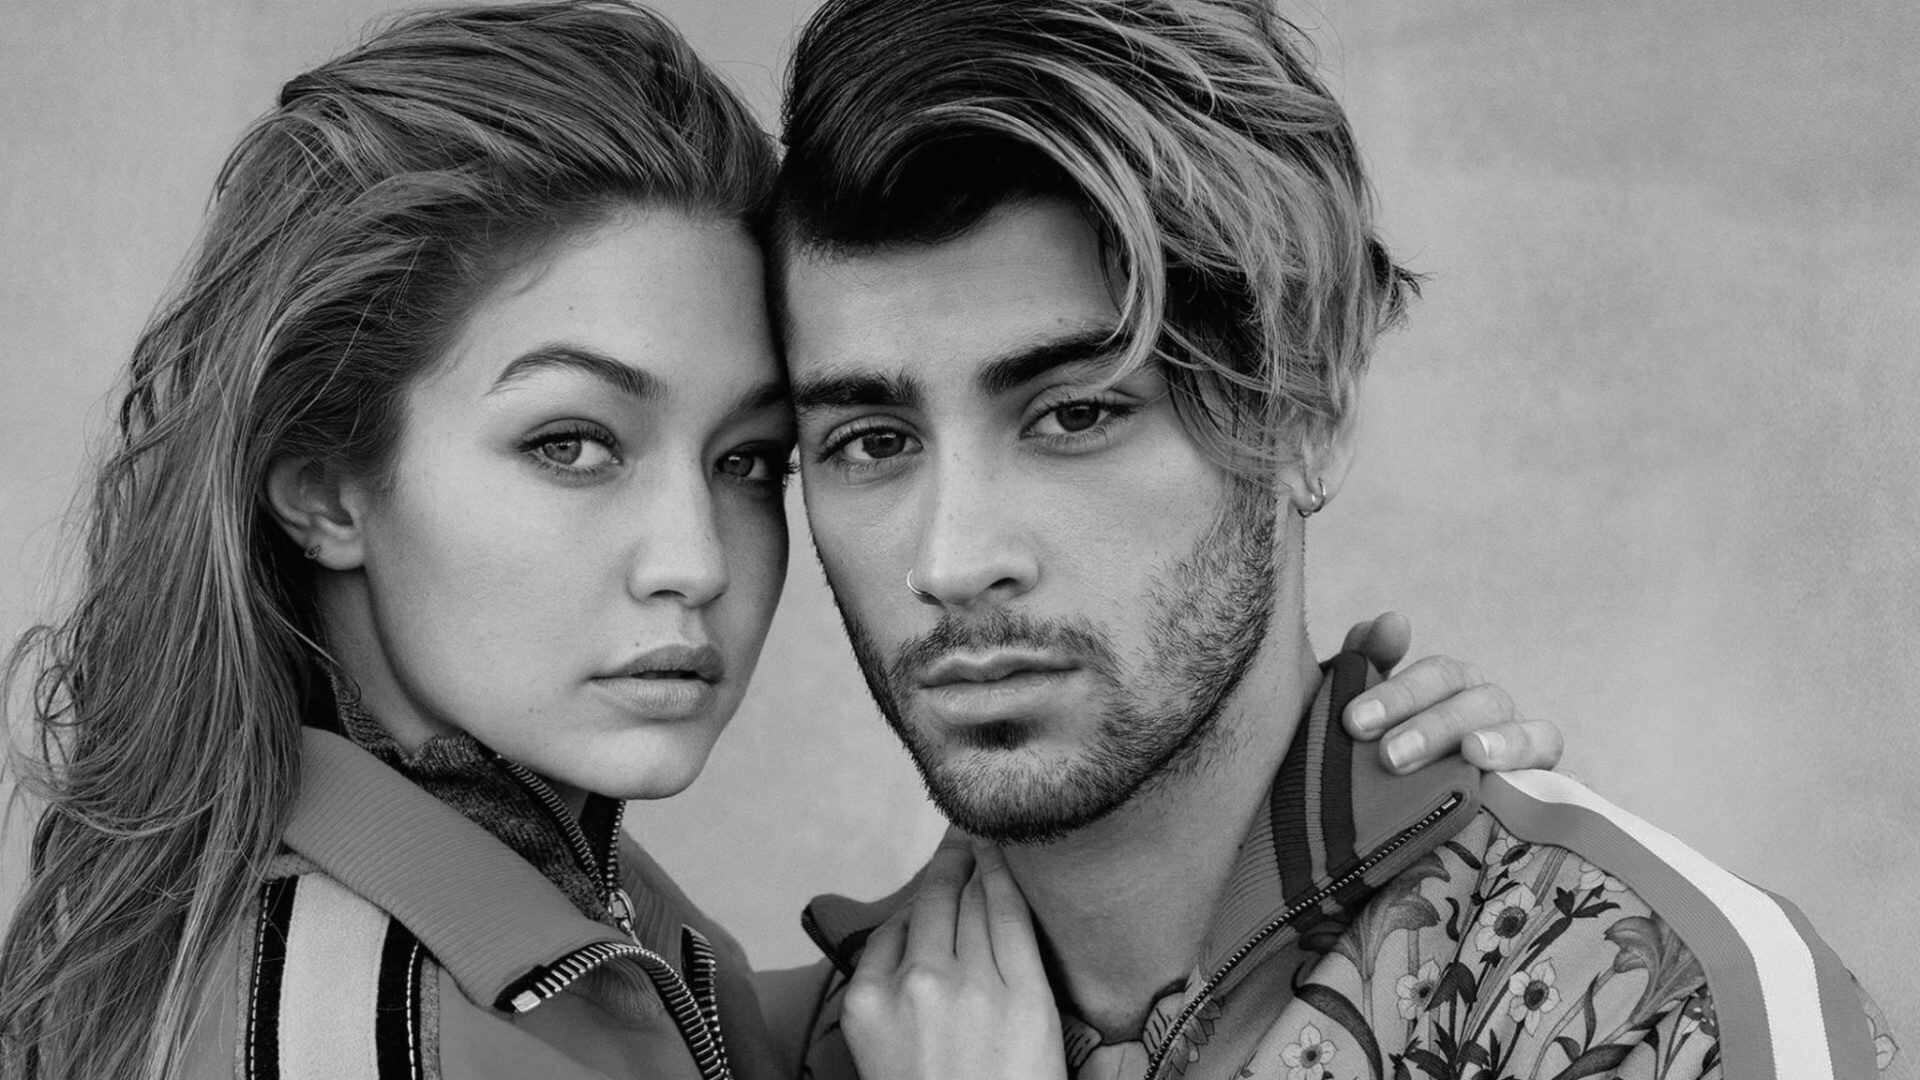 Zayn Malik: Made his debut on The Business of Fashion's annual BoF500 index in 2016, Gigi Hadid. 1920x1080 Full HD Wallpaper.